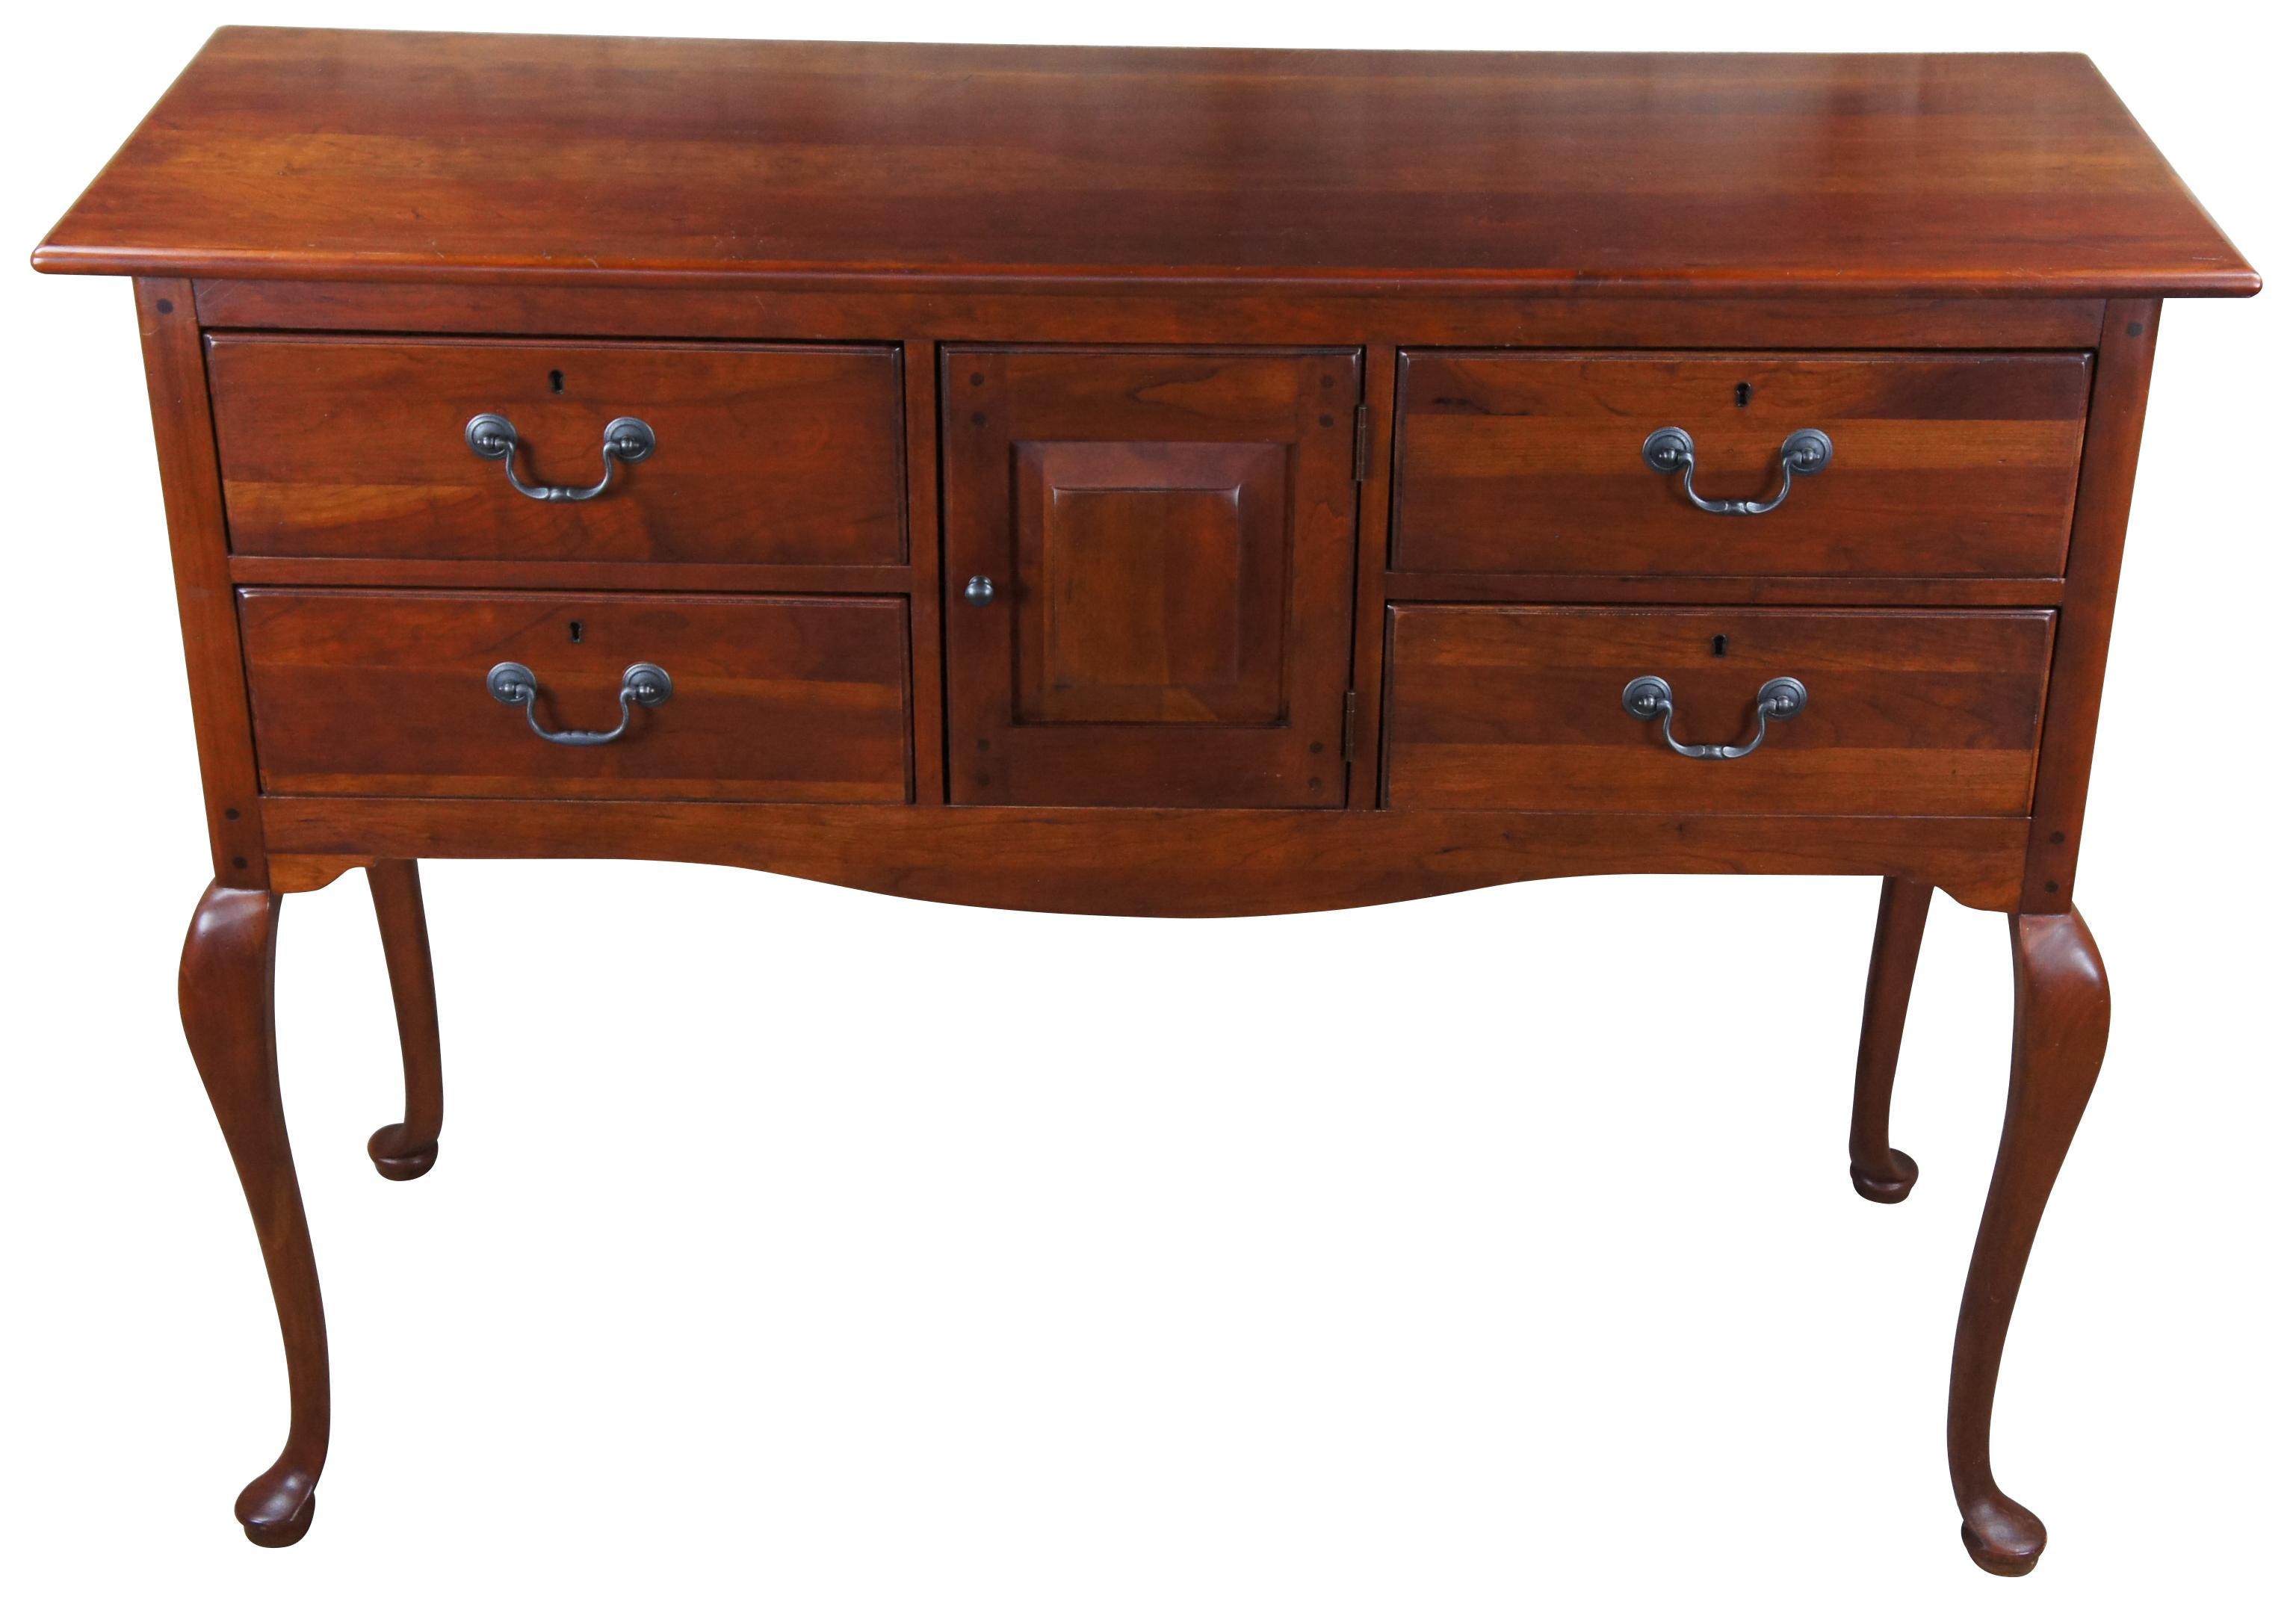 An elegant solid cherry sideboard, server or buffet. by Bob Timberlake for Lexington, circa 1980s. American made farmhouse styling. Features a rectangular frame with central cabinet flanked by four dovetailed drawers. Frame is supported by long